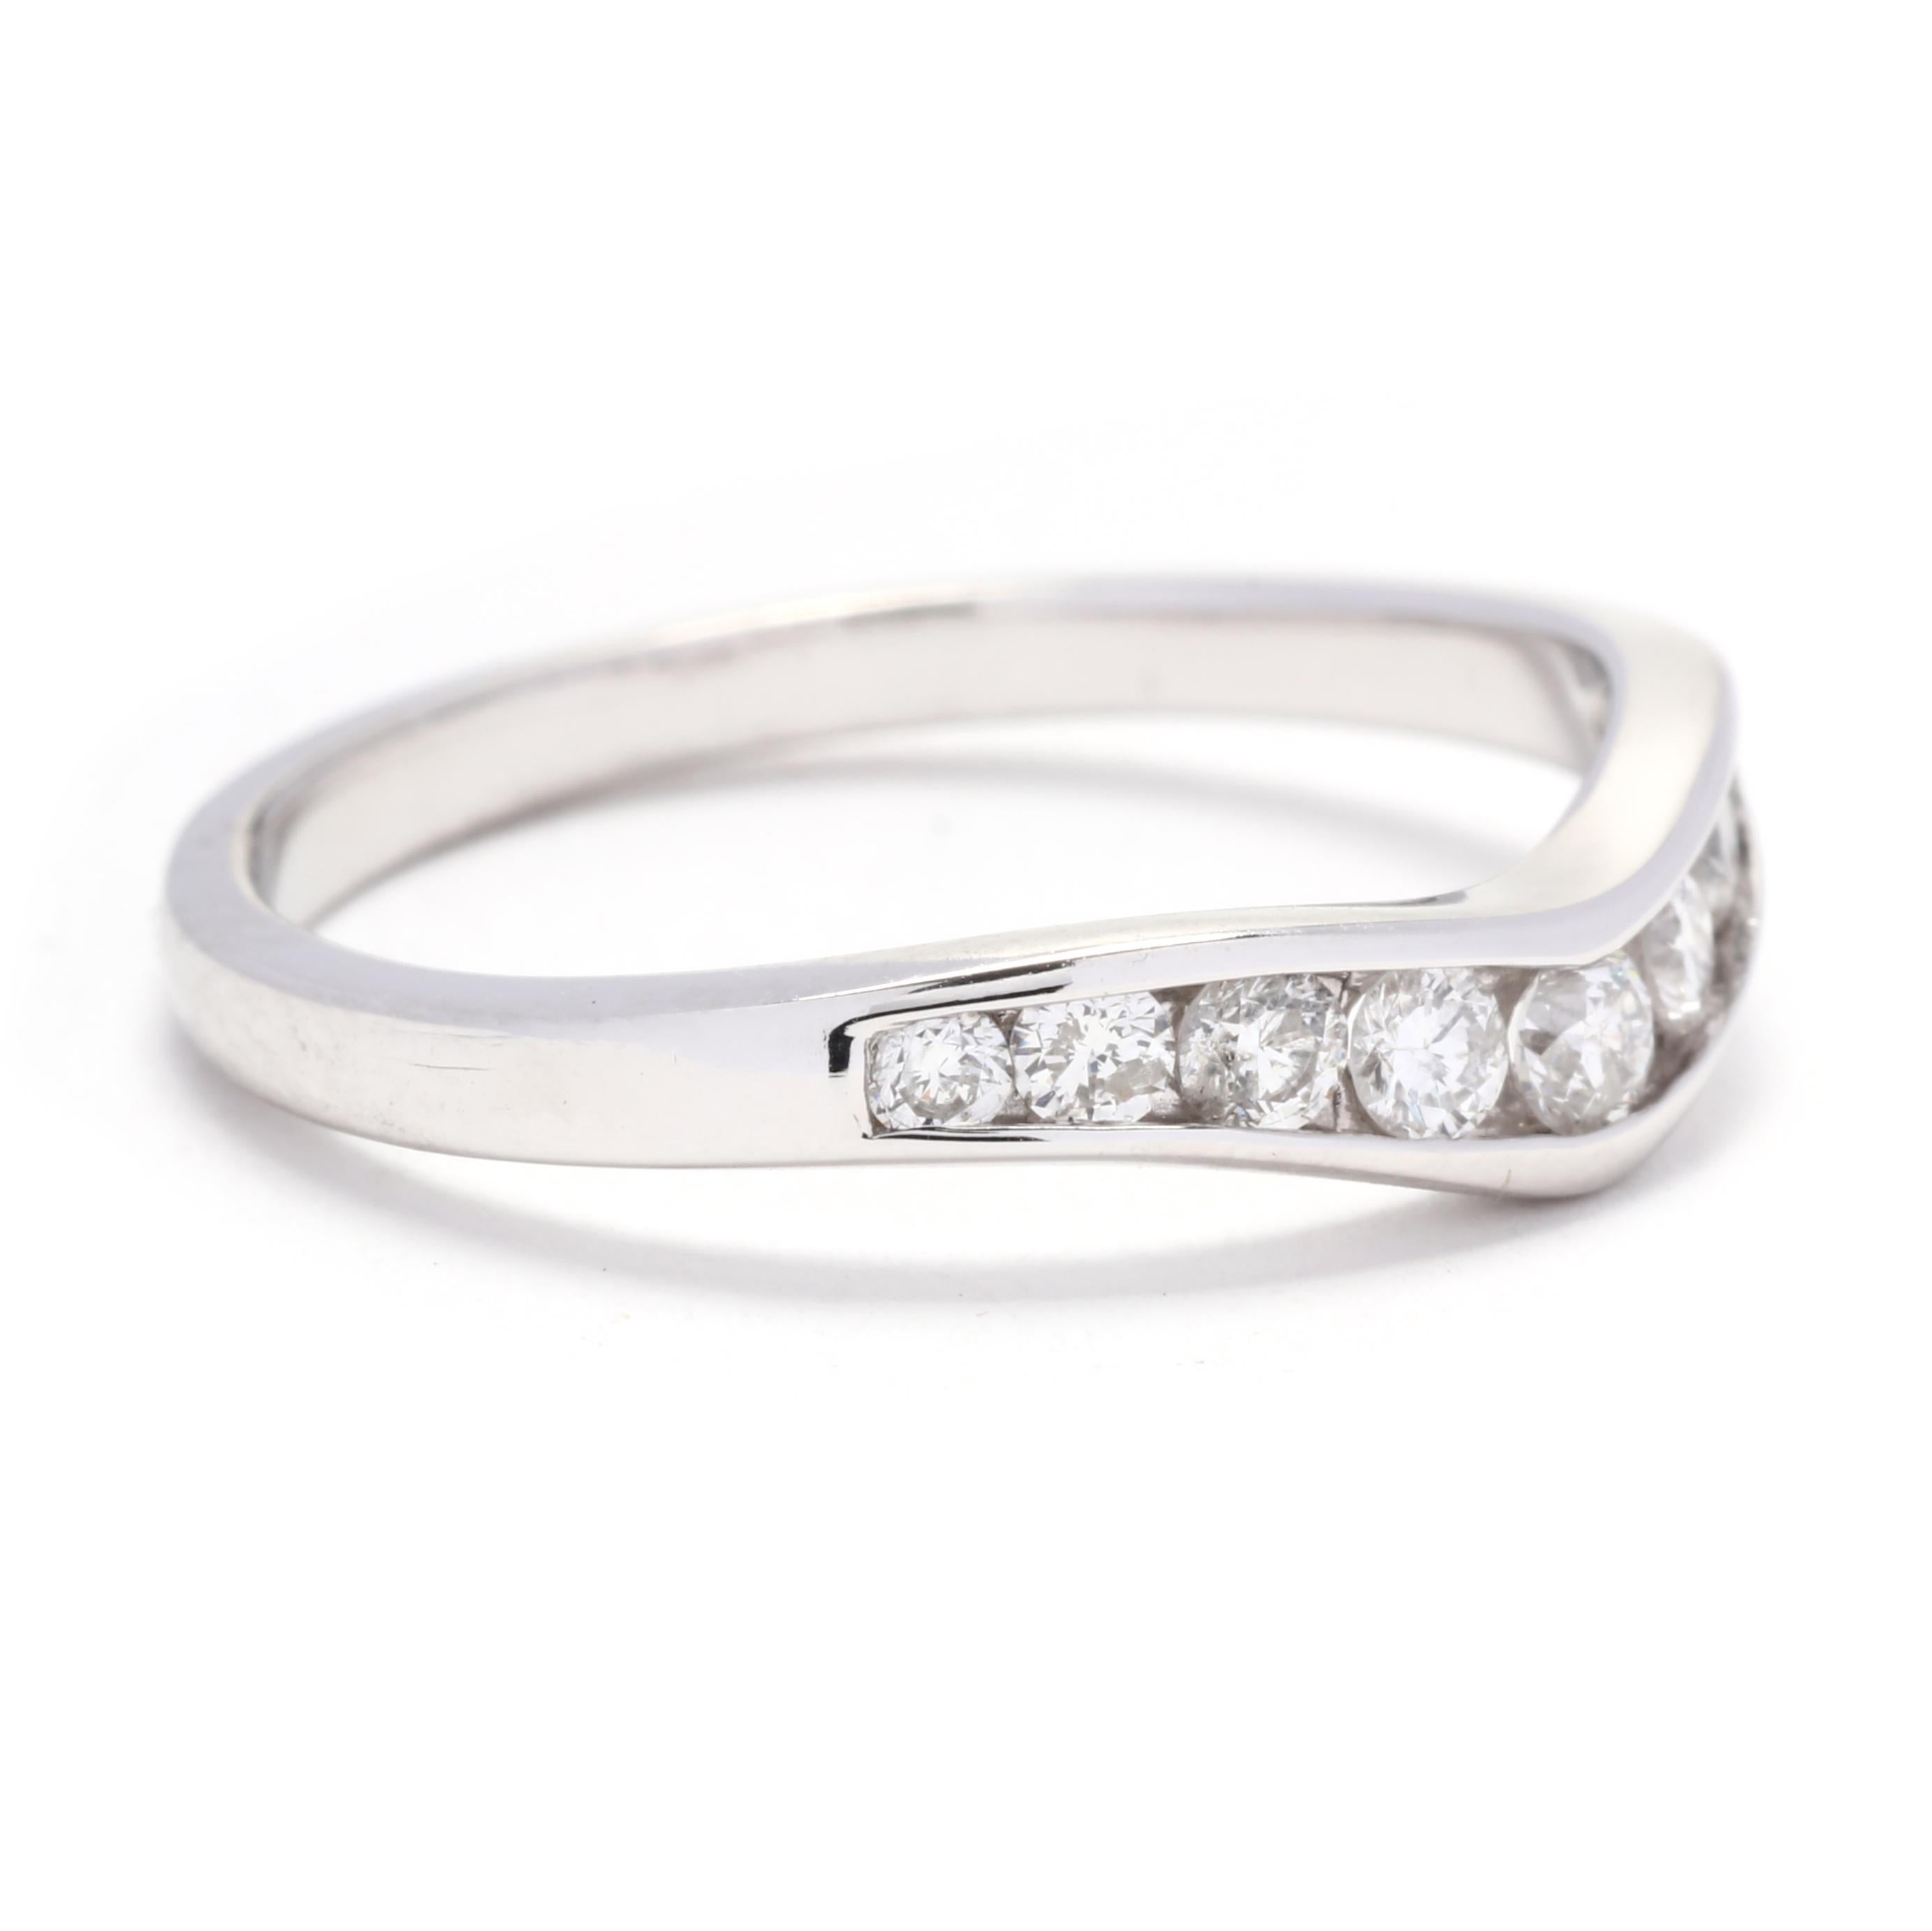 This 0.40ctw curved diamond wedding band is a stunning and unique choice for your special day. Made in 14K white gold, it features a gentle curve that perfectly nestles against your engagement ring or can be worn on its own for a minimalist look.